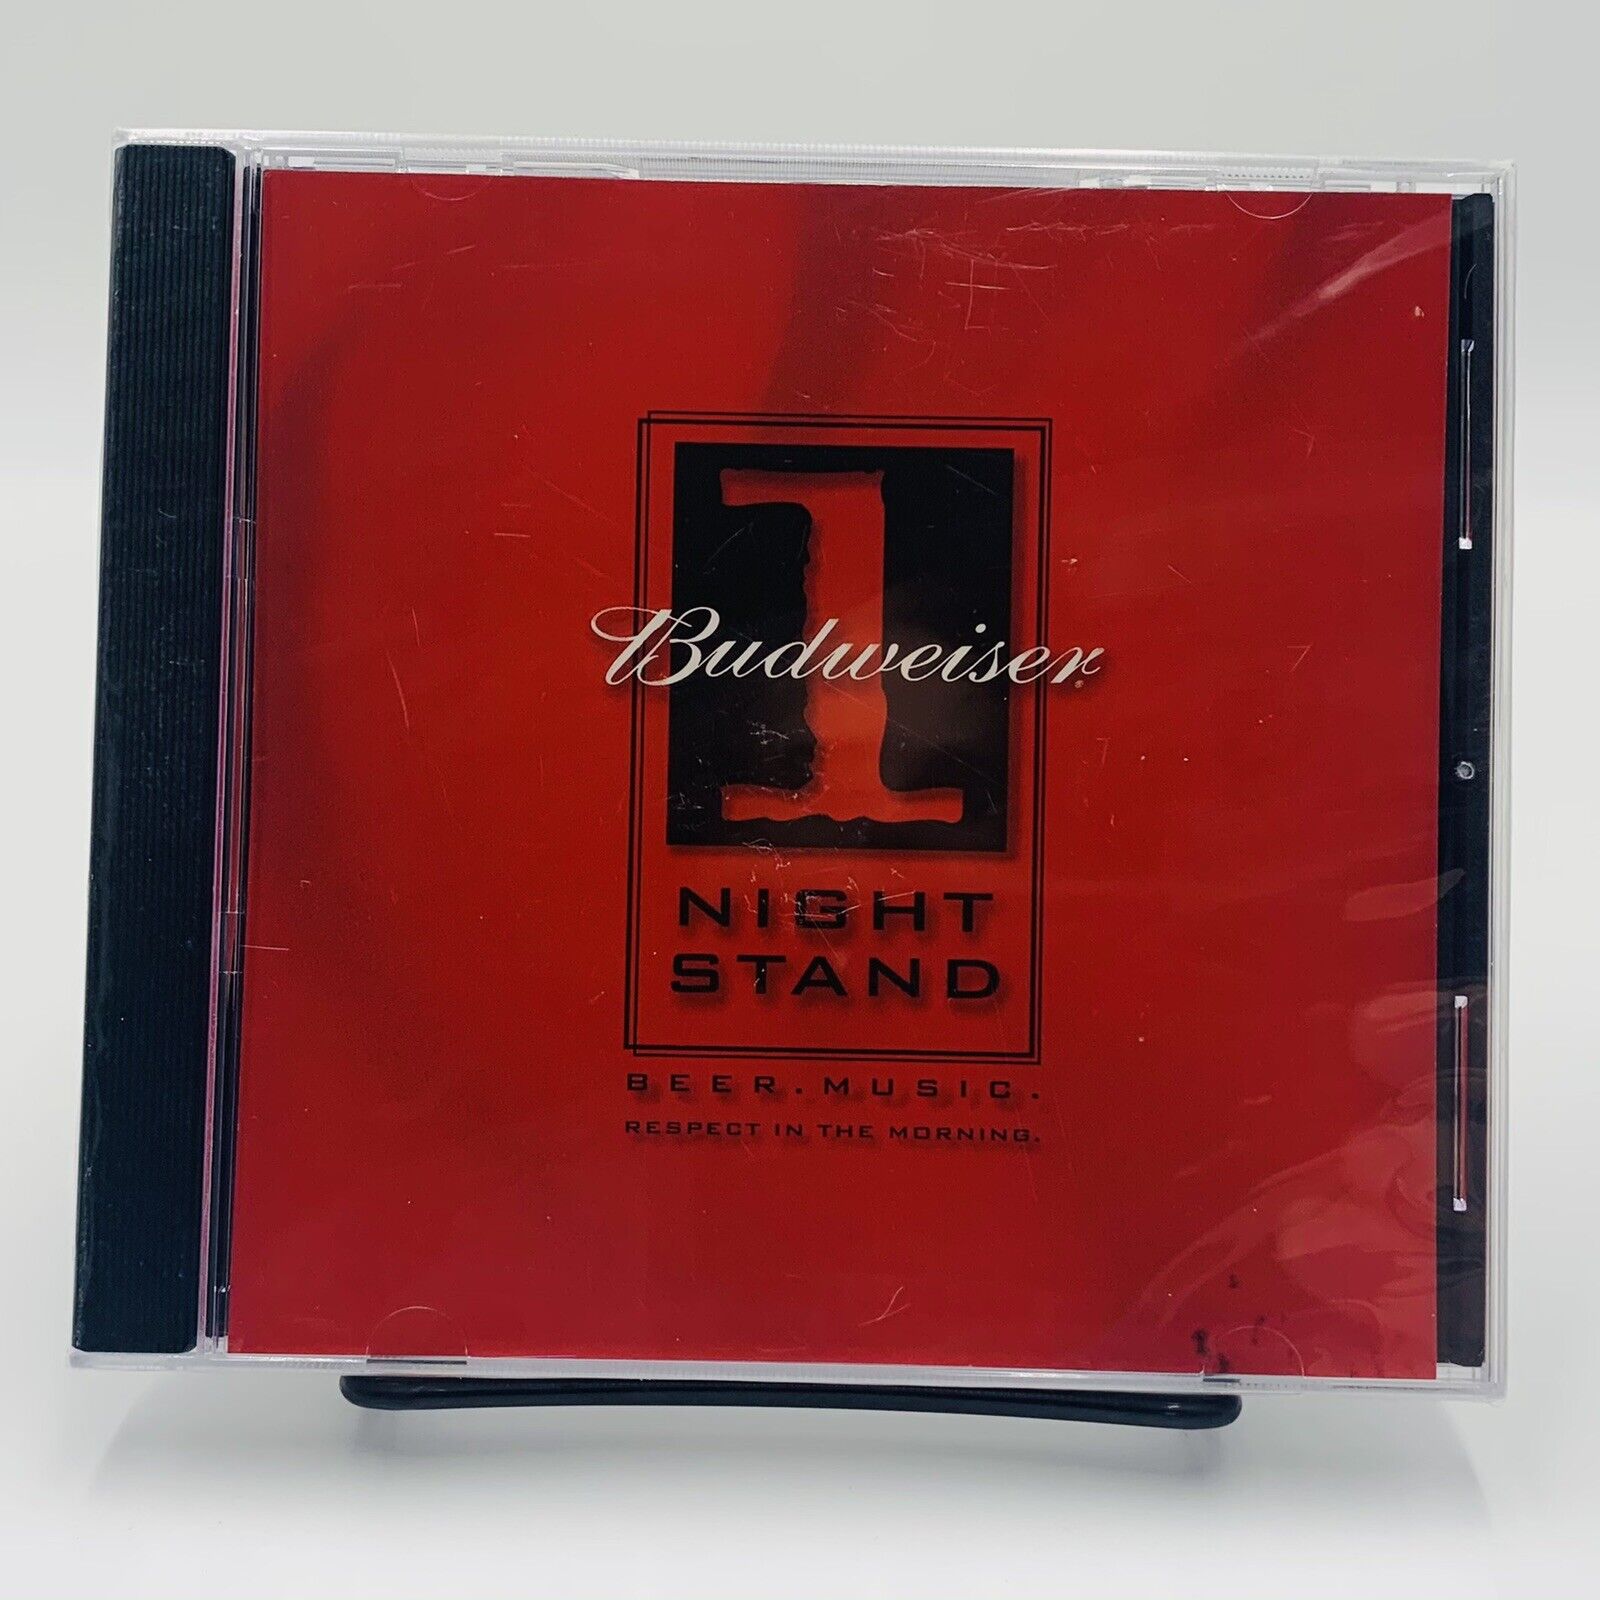 Budweiser 1 Night Stand Beer Music Respect In The Morning (CD, 2002, EMI) SEALED